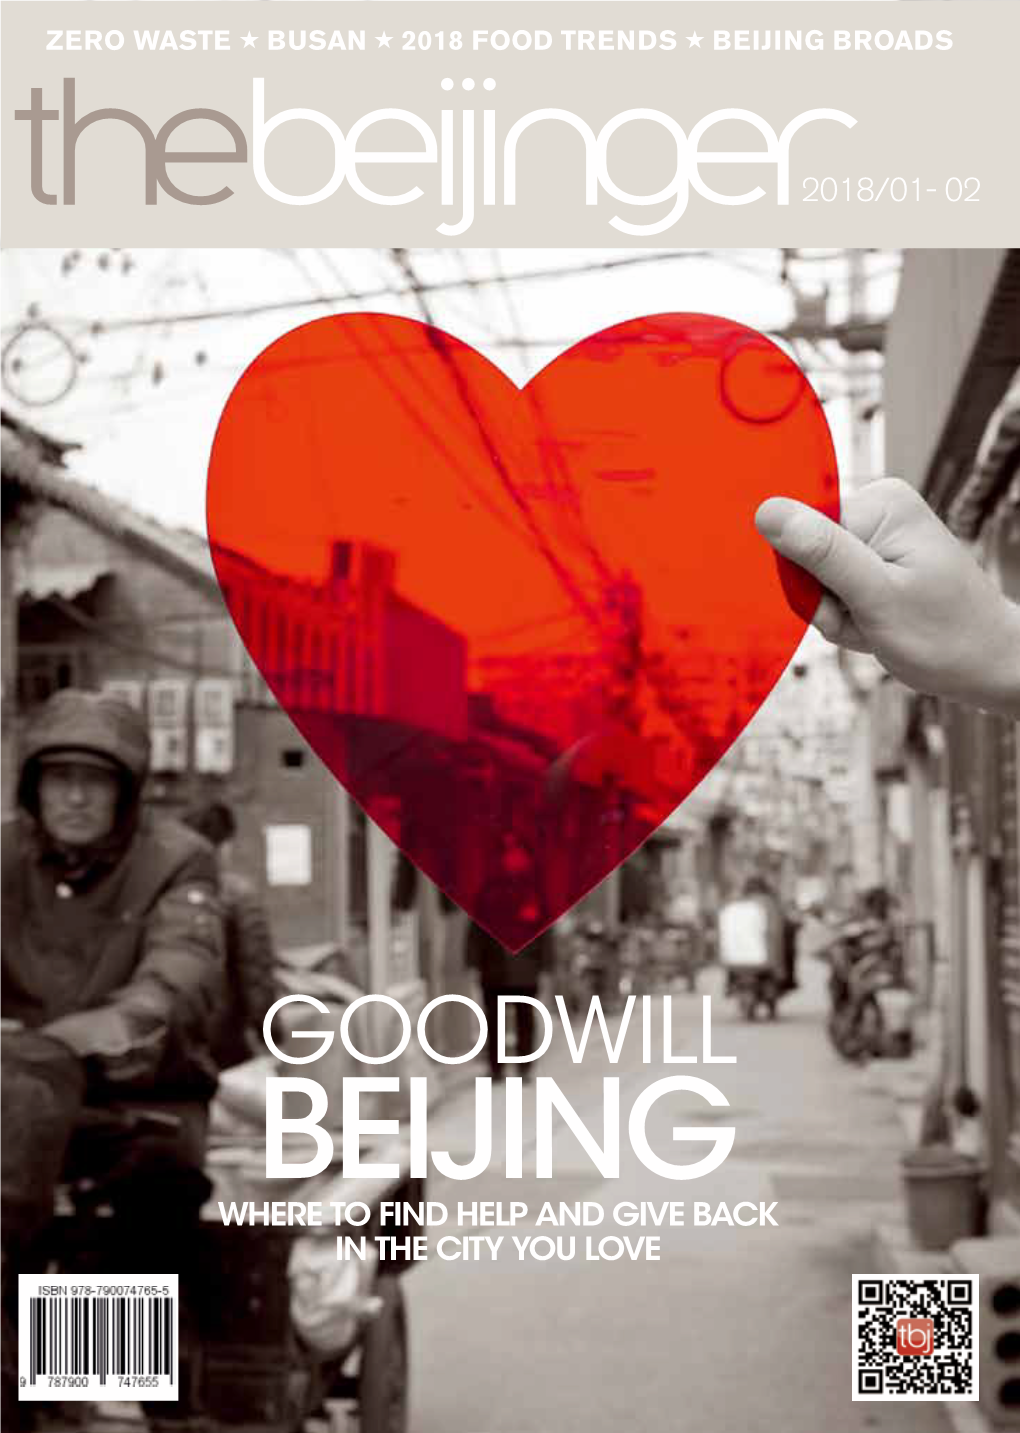 Goodwill Beijing Where to Find Help and Give Back in the City You Love